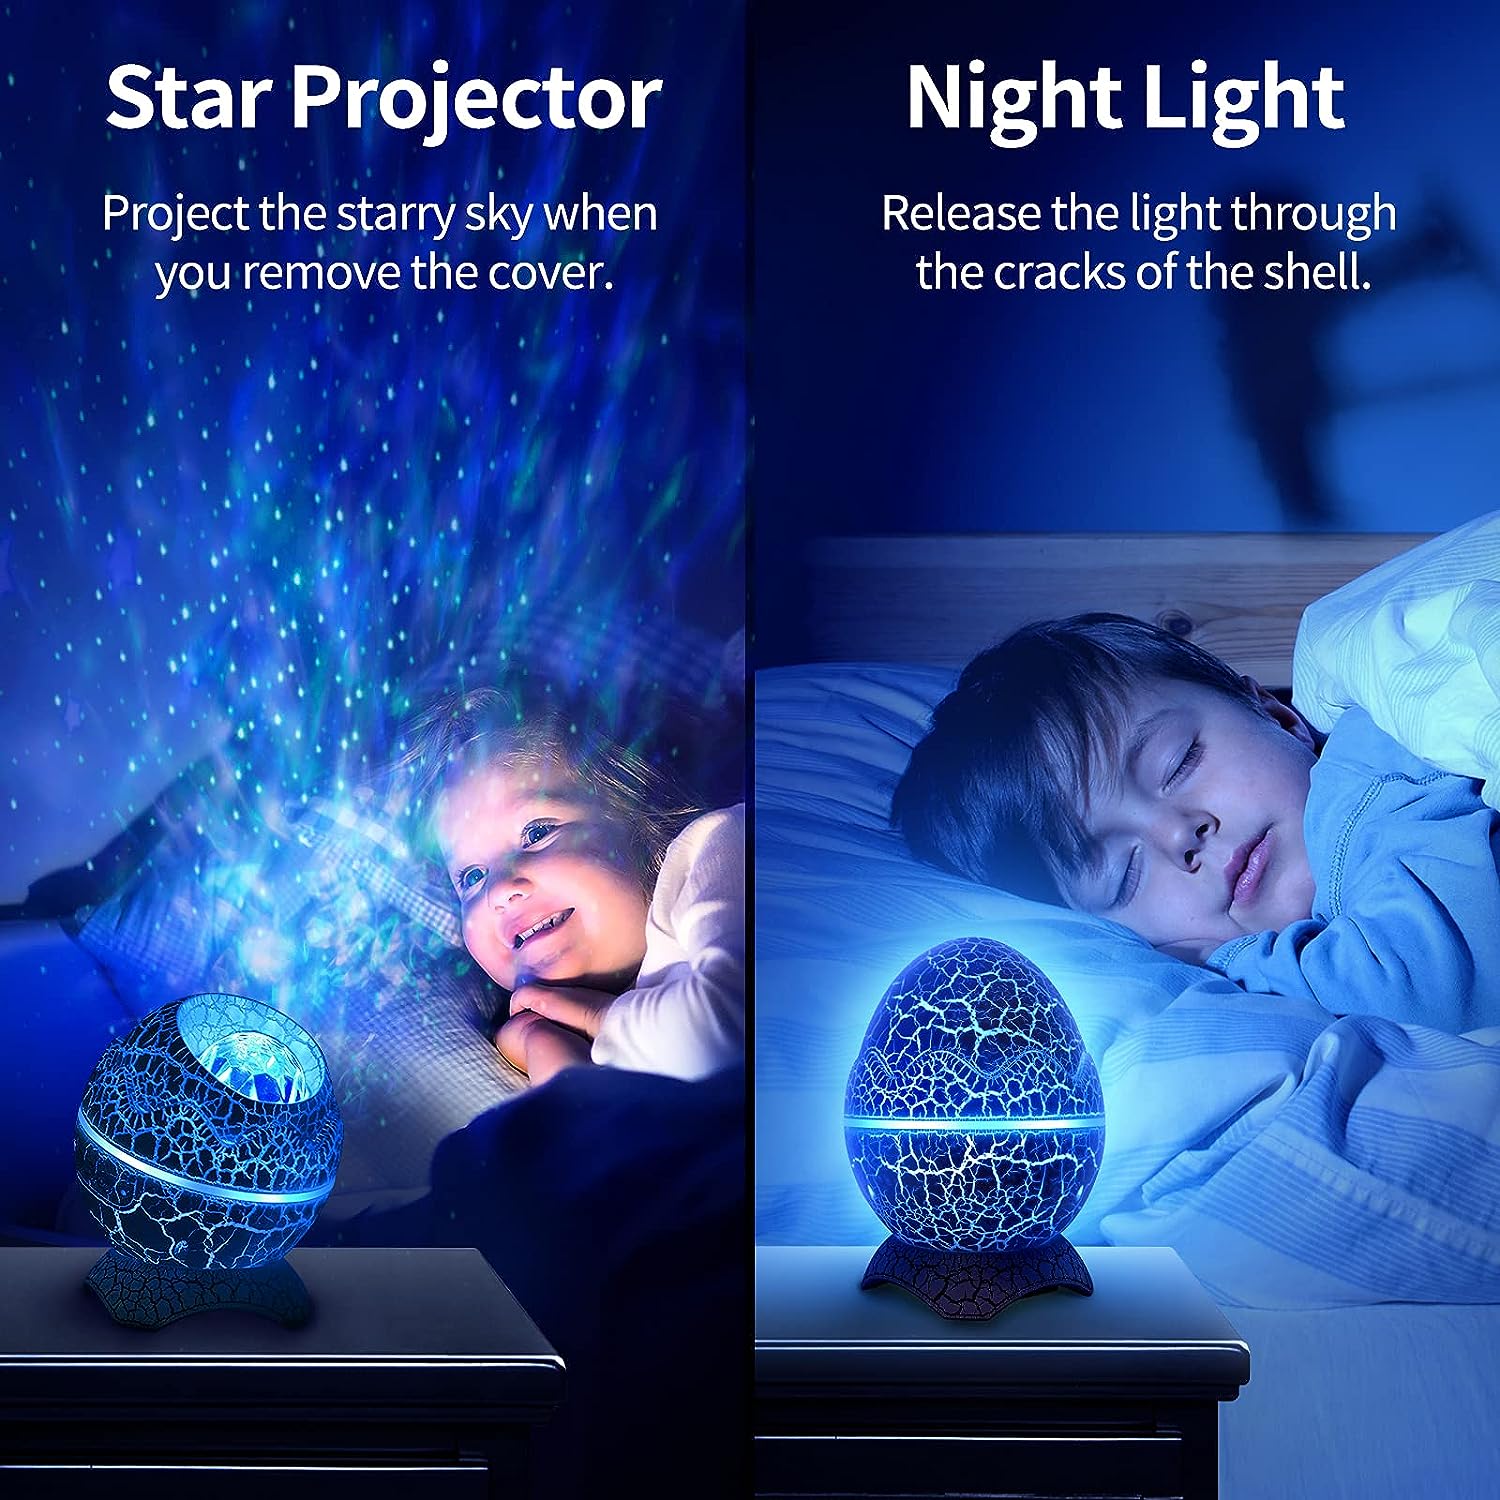 LED Star Projector Galaxy Projector Light with White Noise Soothes Sleep, Music Player for Party, Rotating Night Lights for Bedroom and Room Decoration, Gifts for Kids/Adults